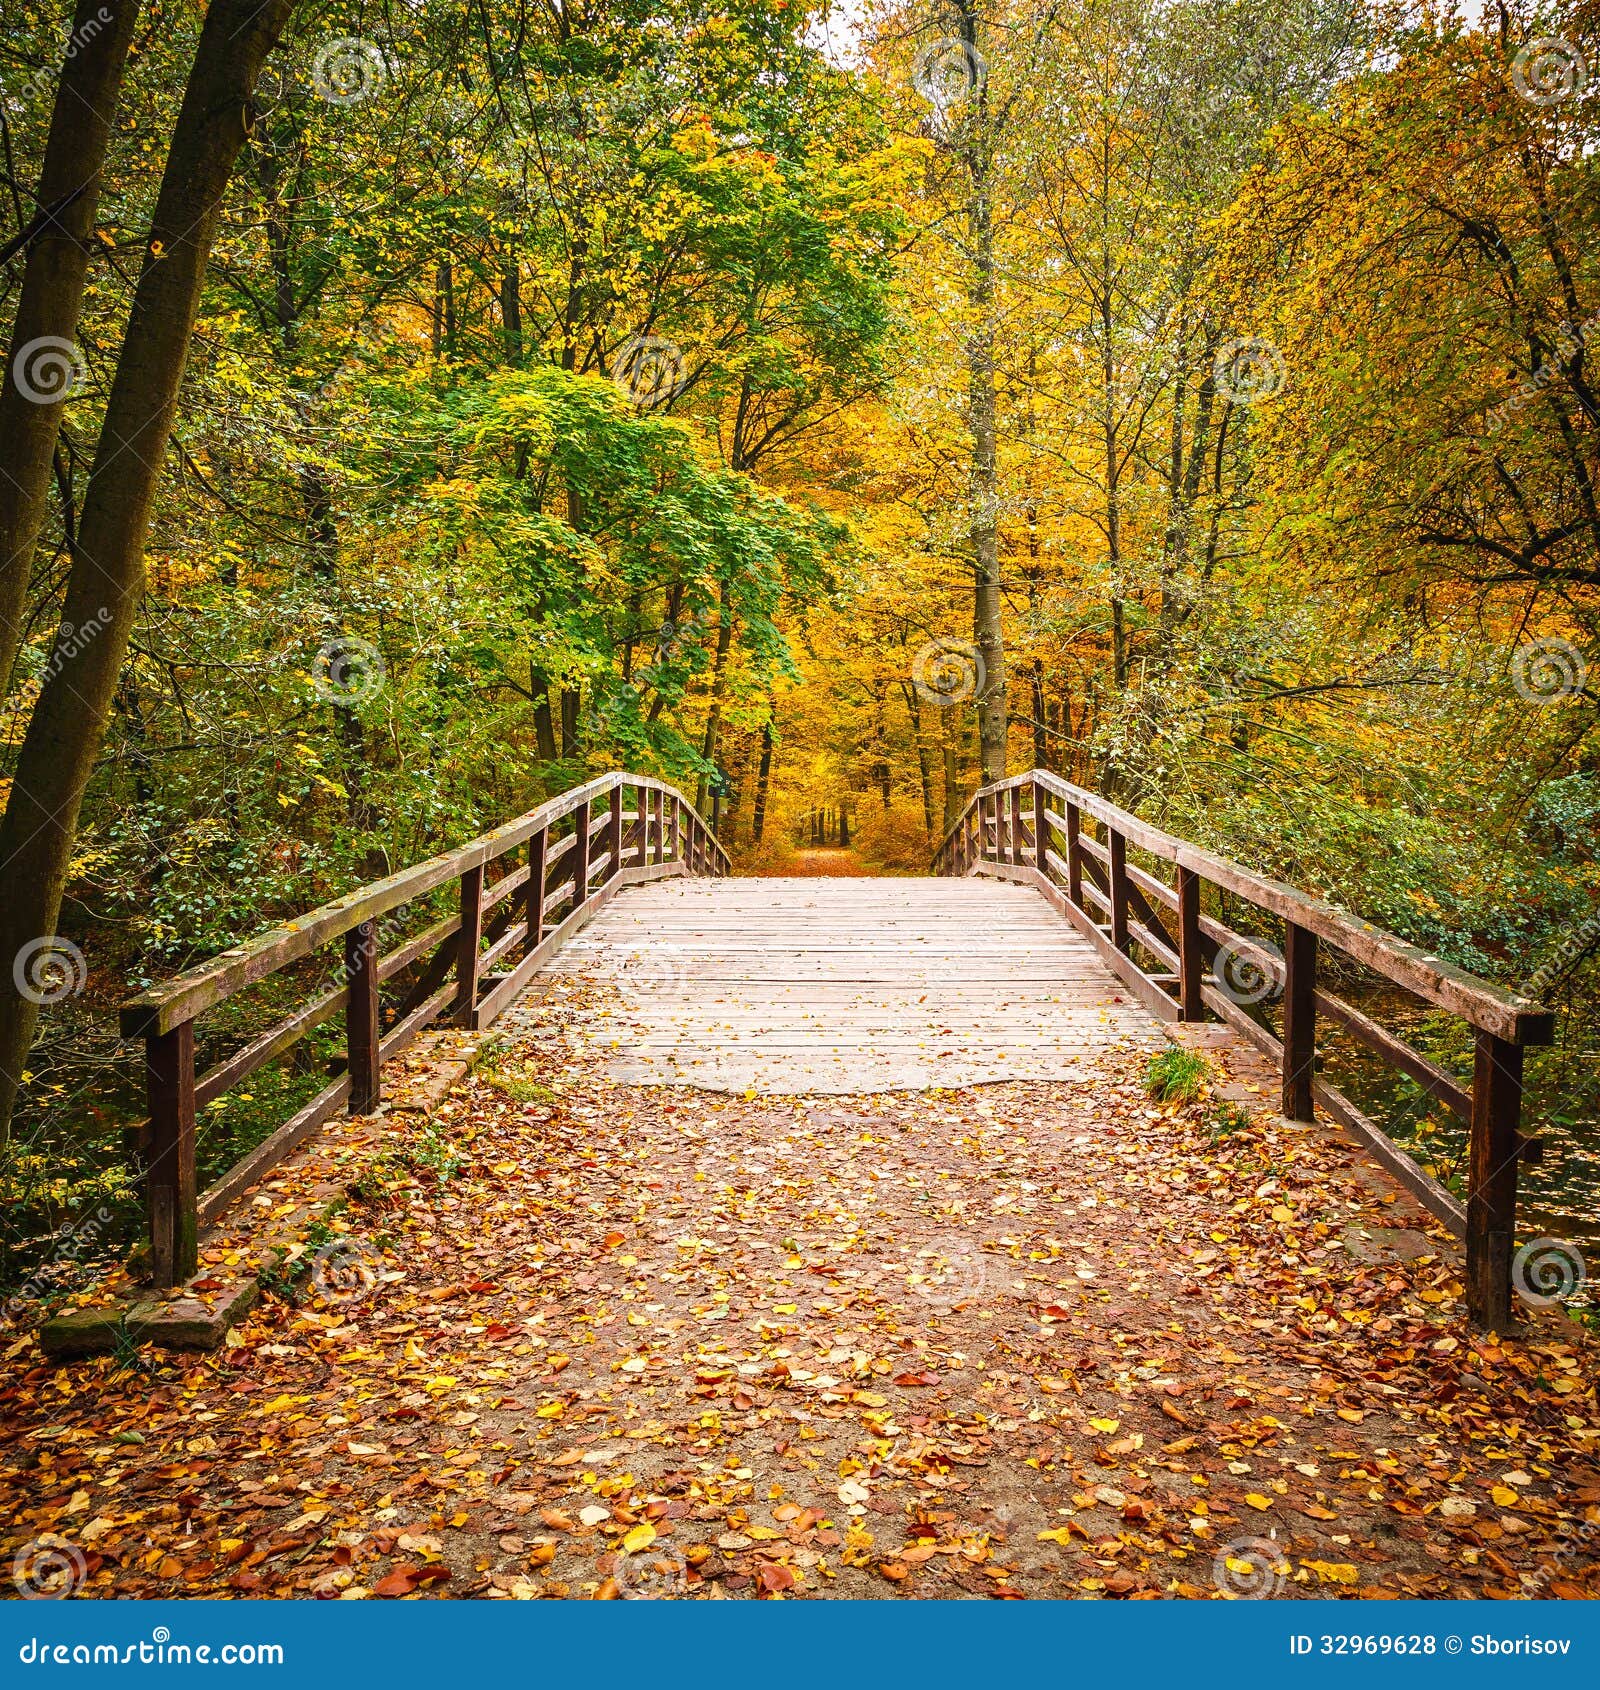 Bridge In Autumn Forest Stock Photo Image Of Forest 32969628